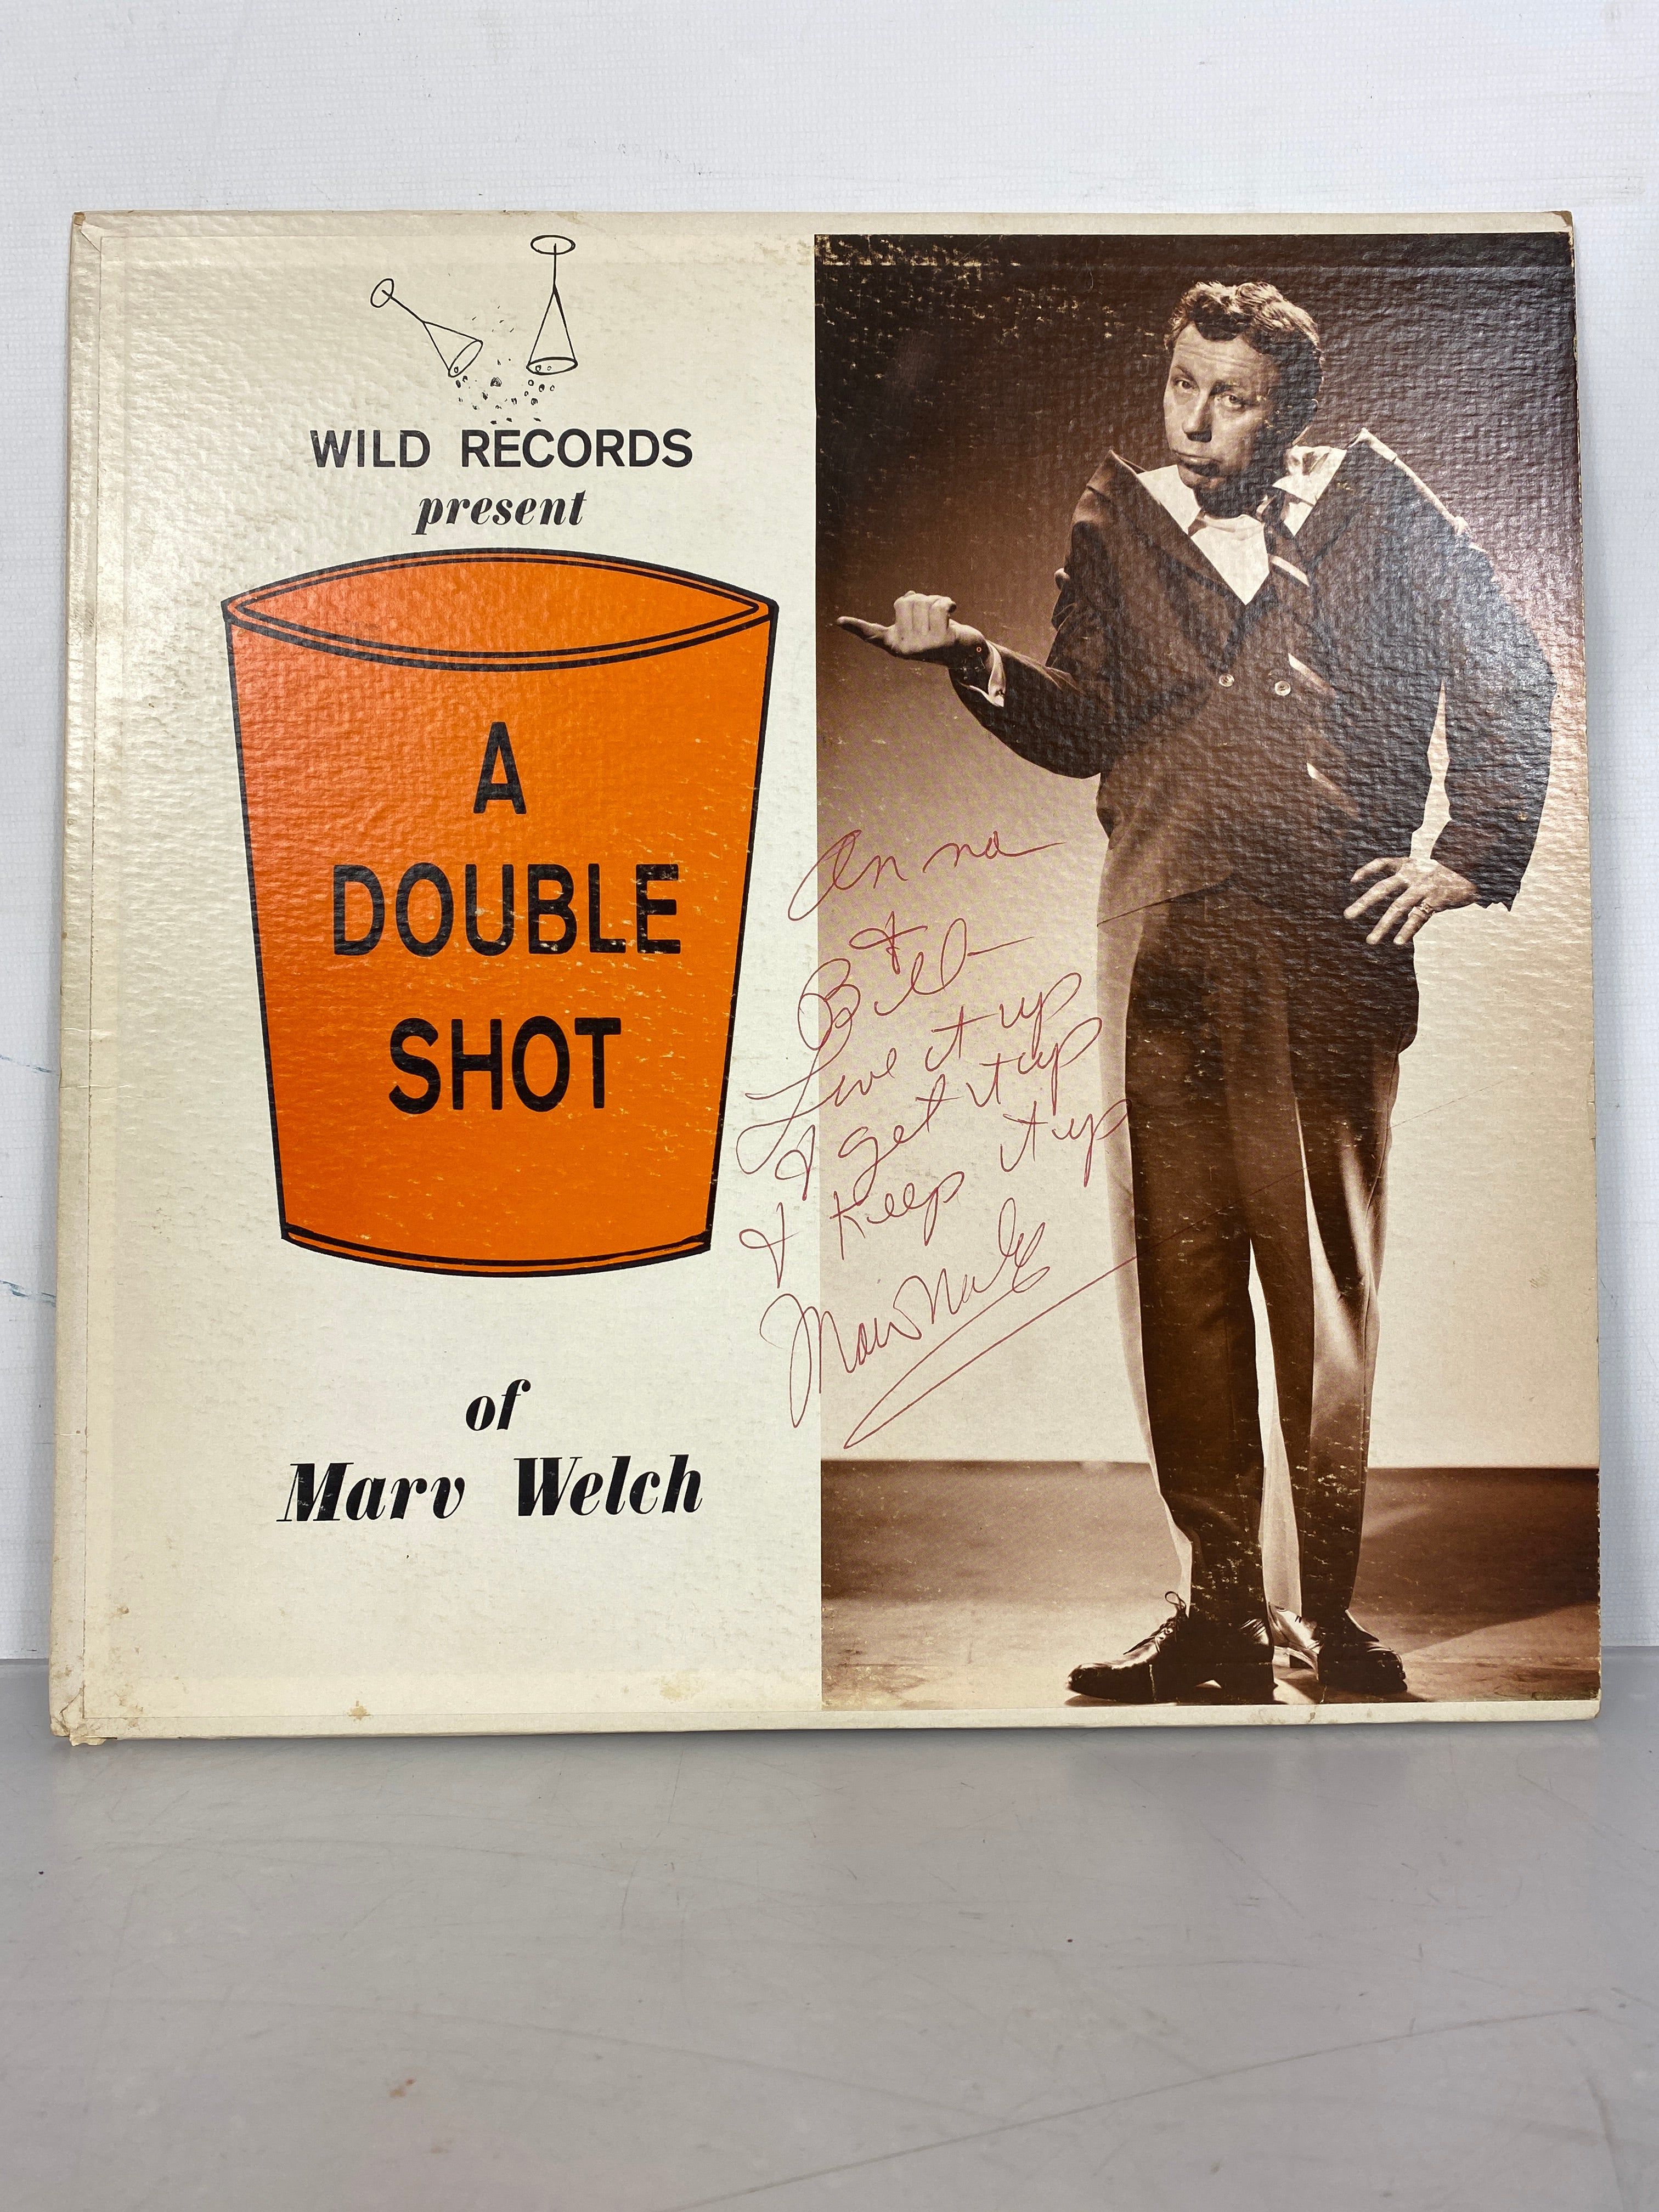 Lot of 2 *Autographed* Marv Welch LP Records